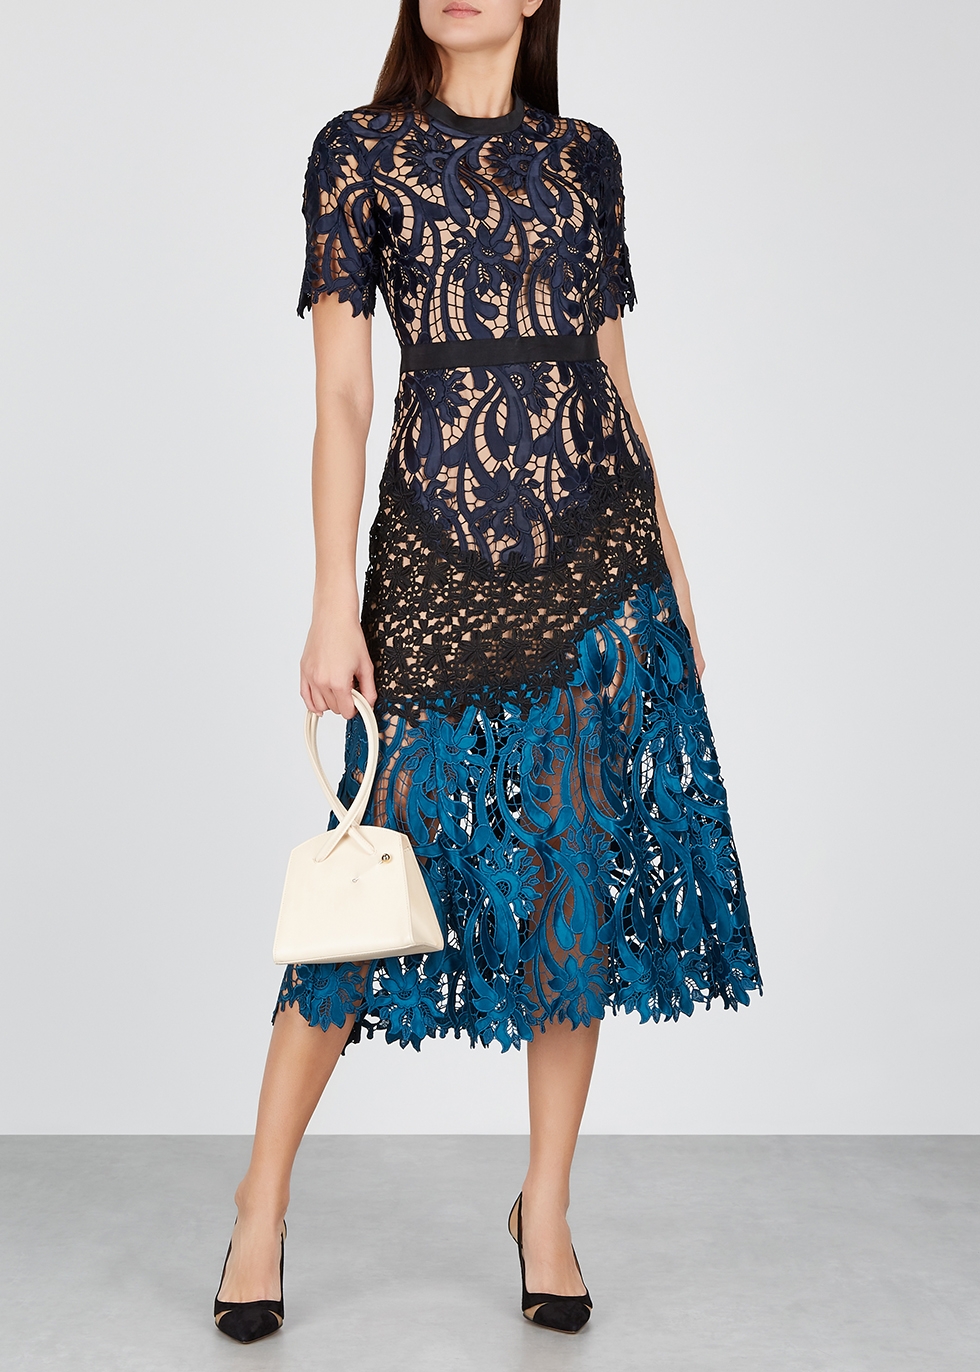 Lace Midi Dress Self Portrait Top Sellers, UP TO 60% OFF | www 